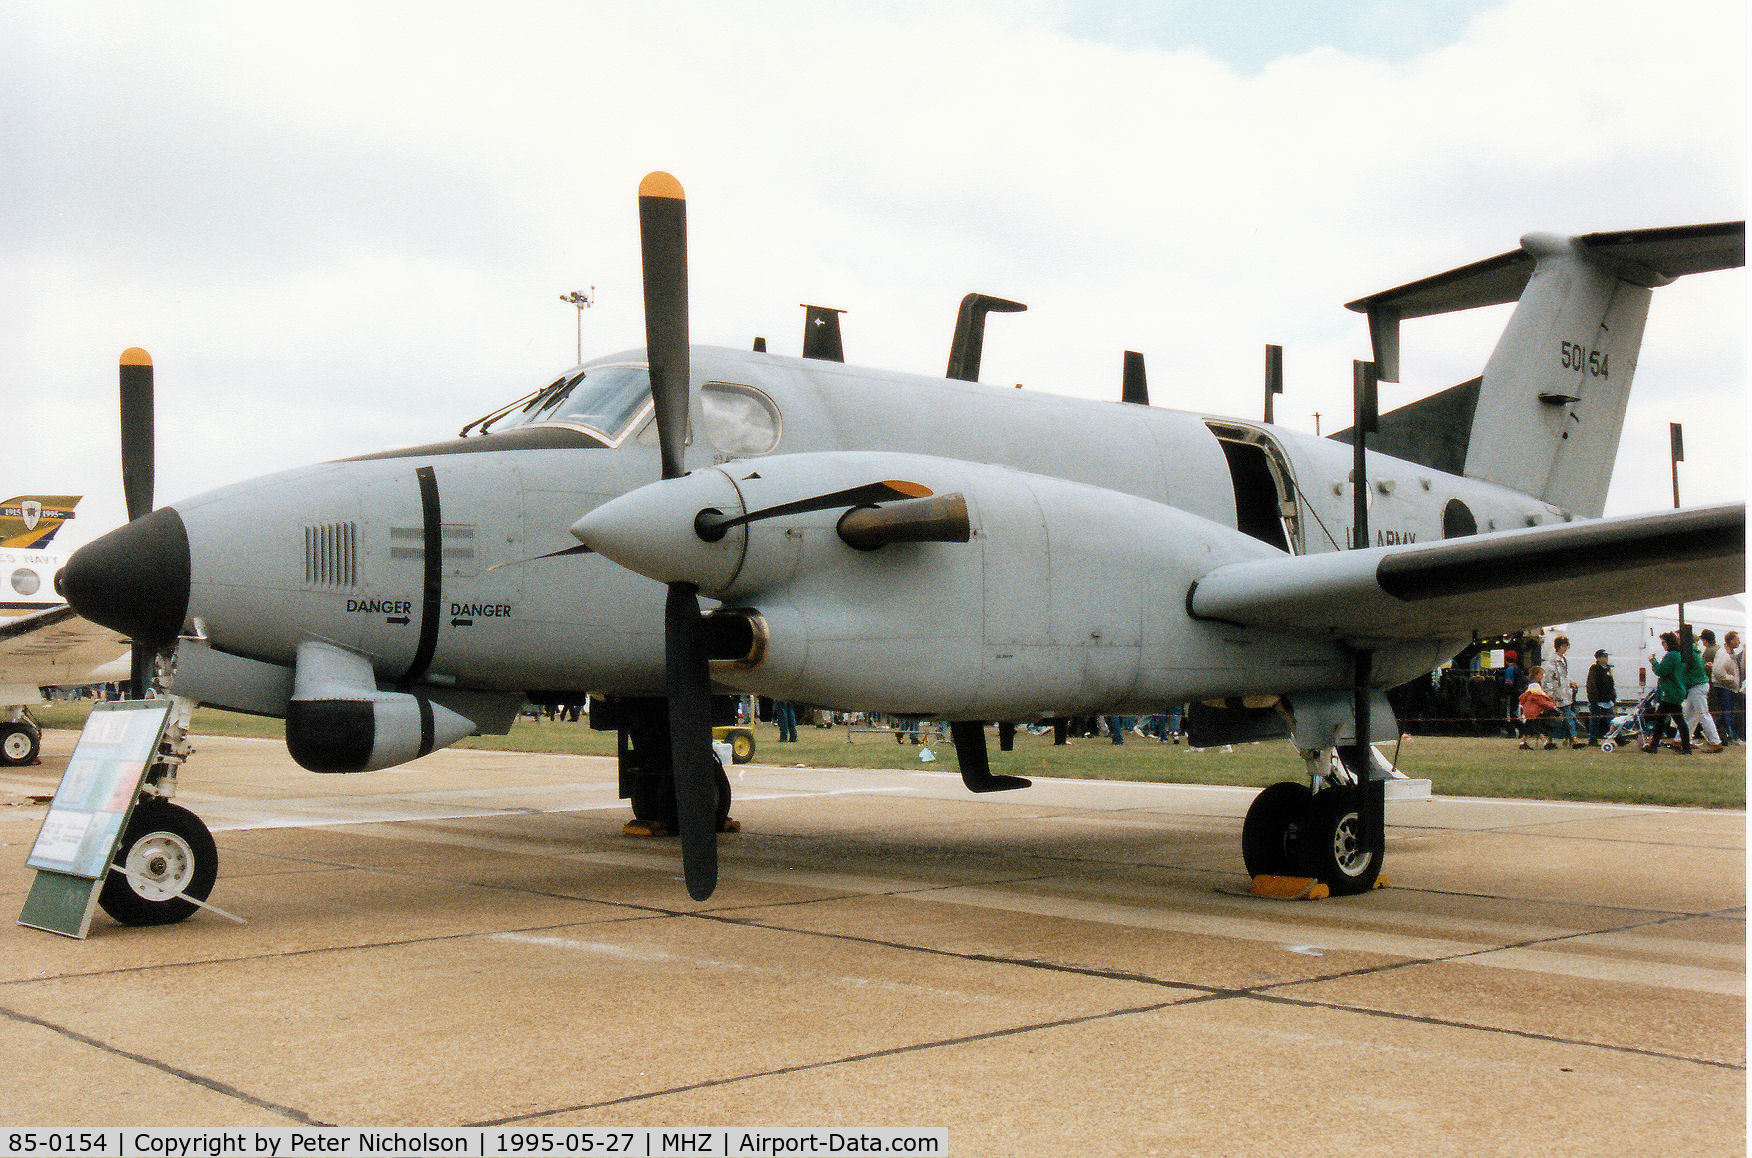 85-0154, 1985 Beech RC-12K Huron C/N FE-008, RC-12K Huron, callsign Argus 69, of 1st Military Intelligence Battalion at Weisbaden on display at the 1995 Mildenhall Air Fete.